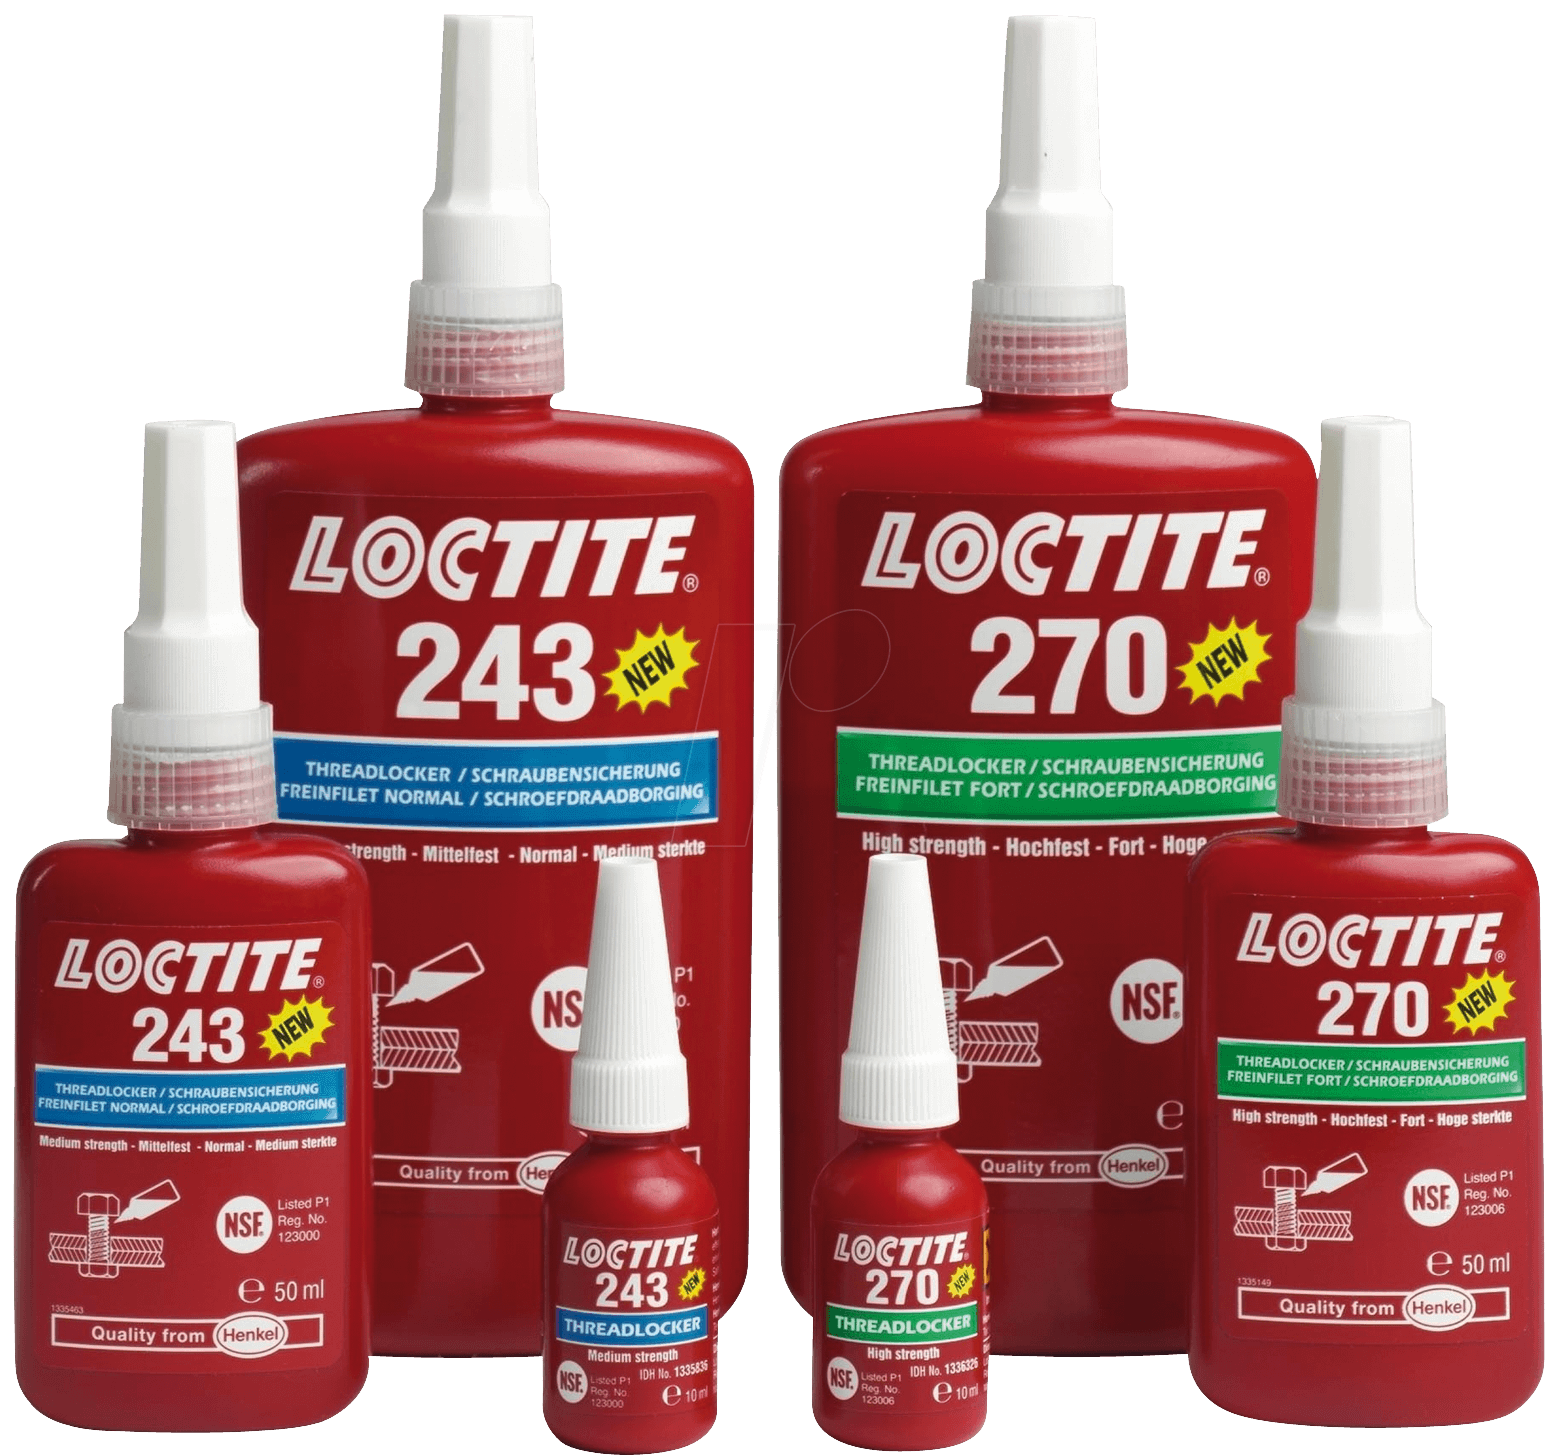 loctite products